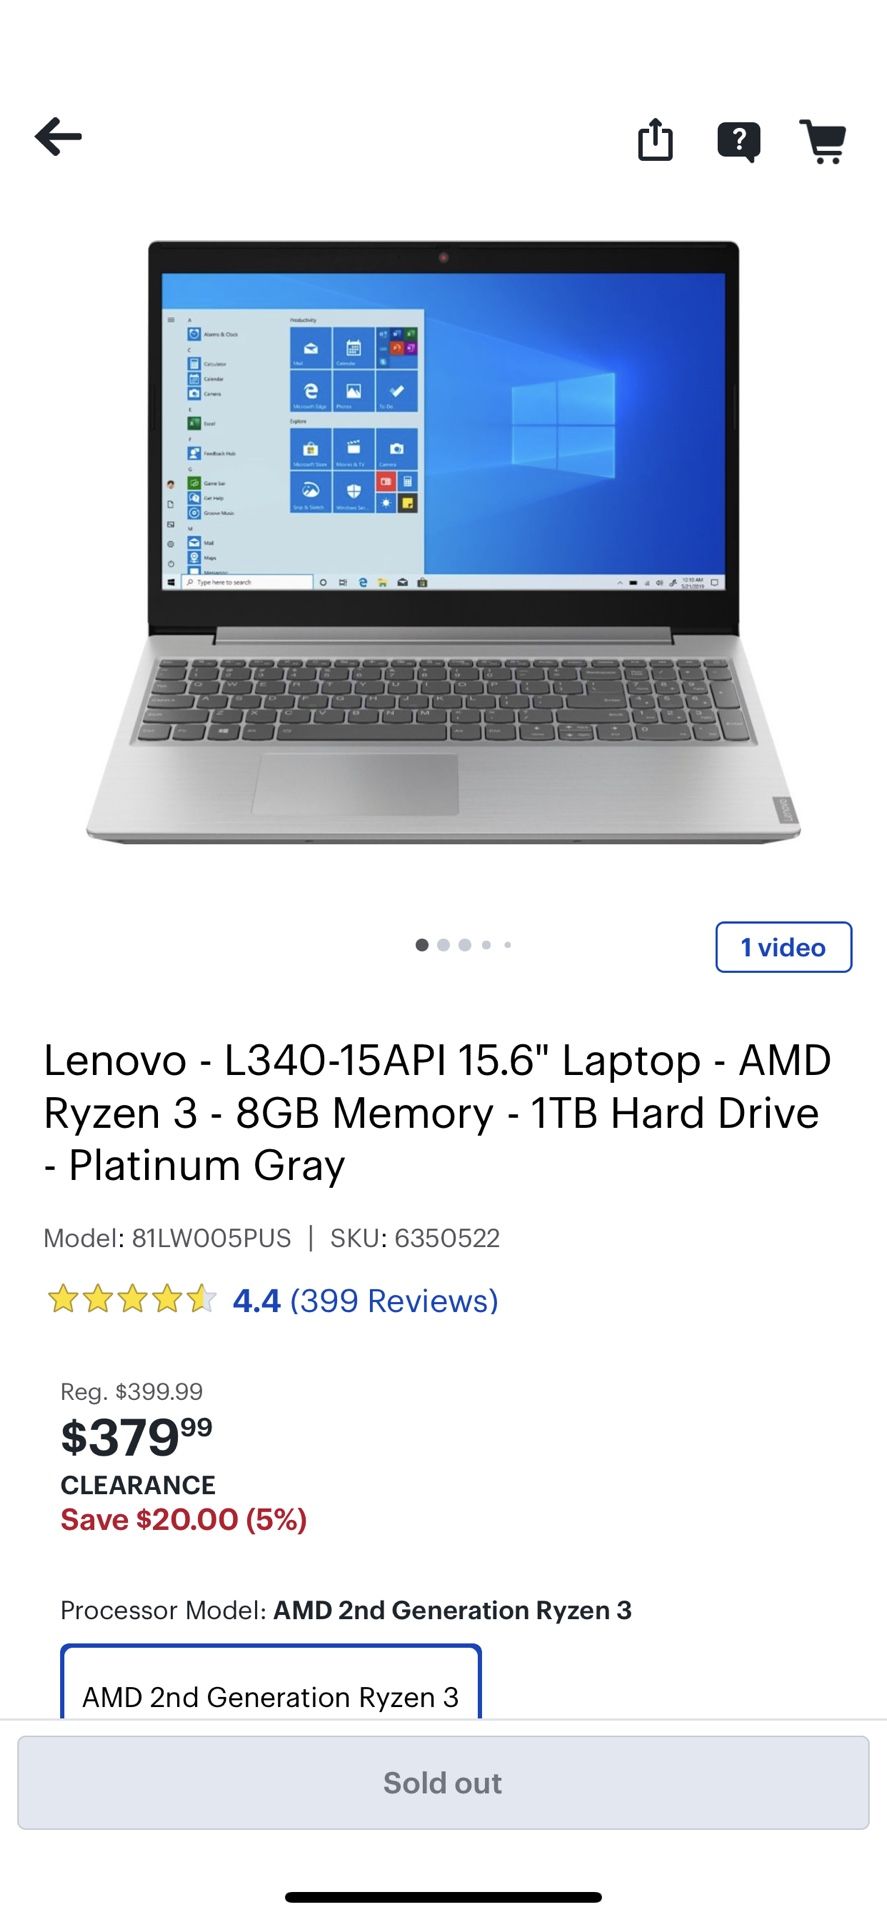 Brand New Lenovo Laptop In its original box from Best Buy